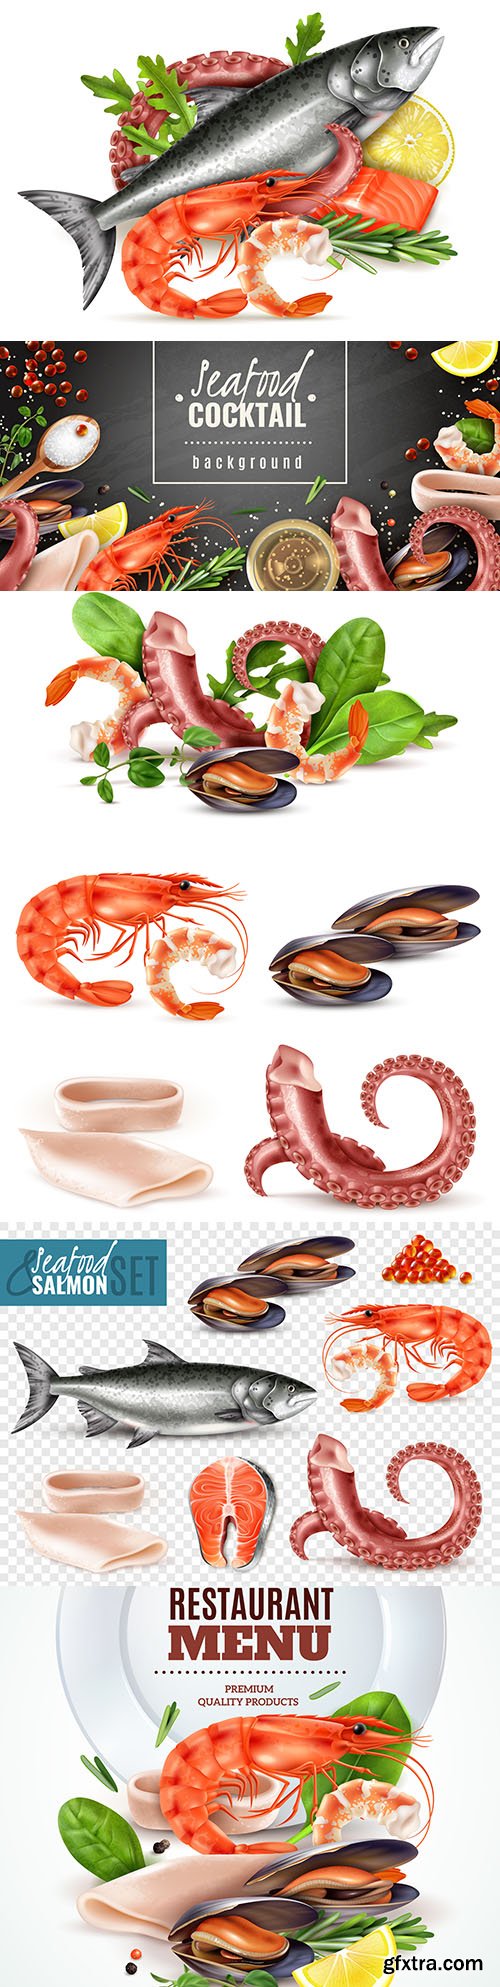 Delicious seafood and restaurant menu realistic set
